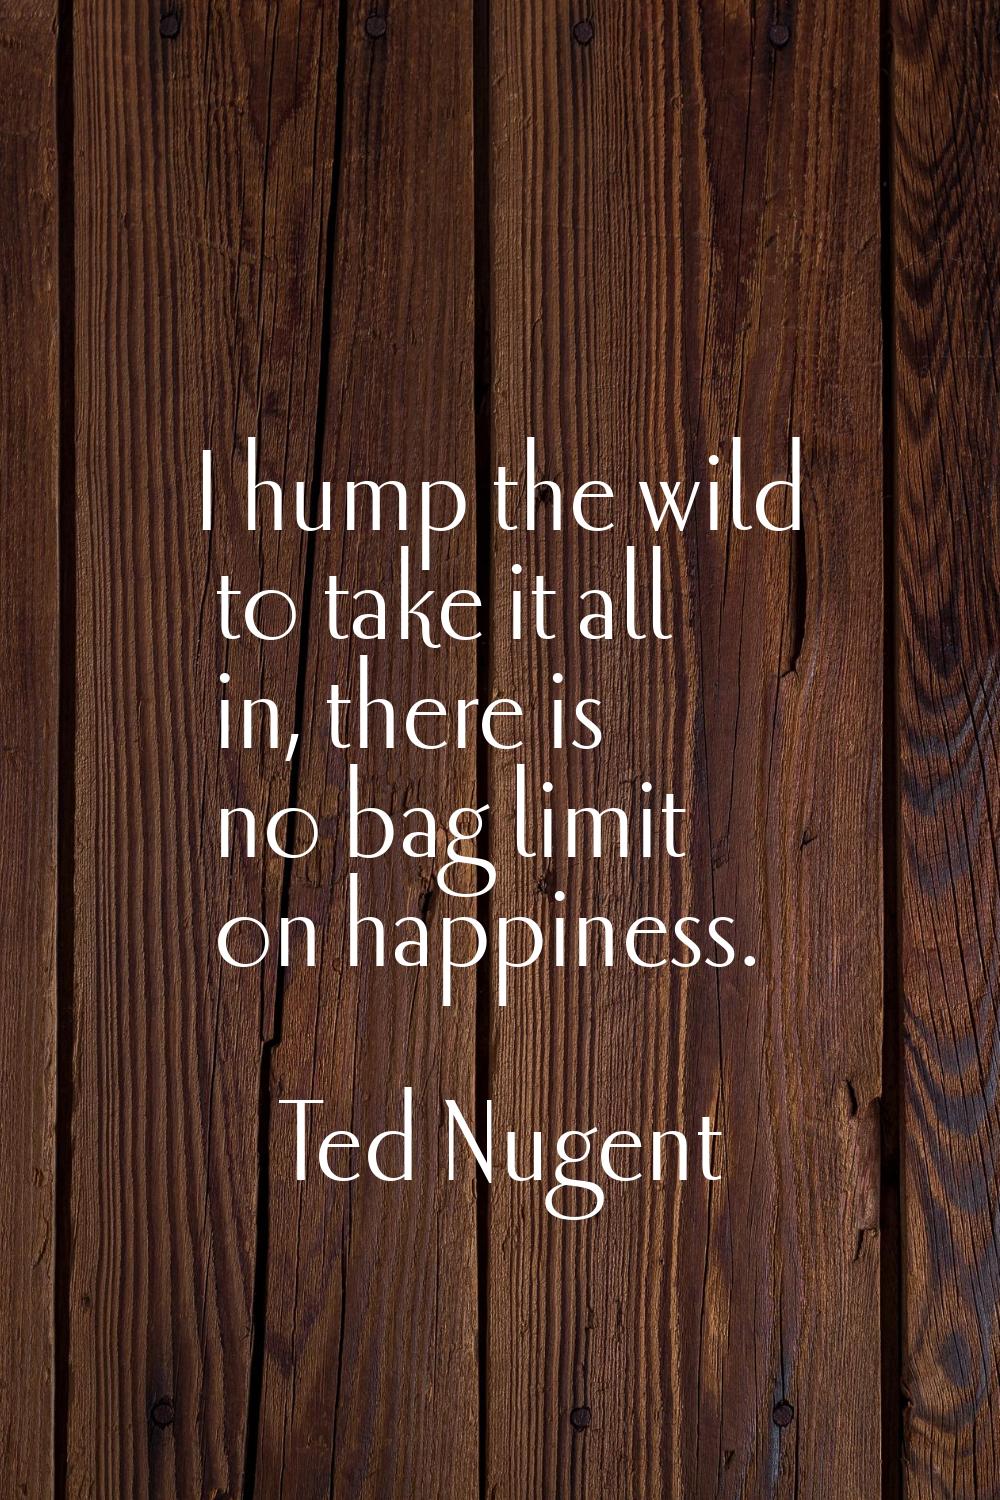 I hump the wild to take it all in, there is no bag limit on happiness.